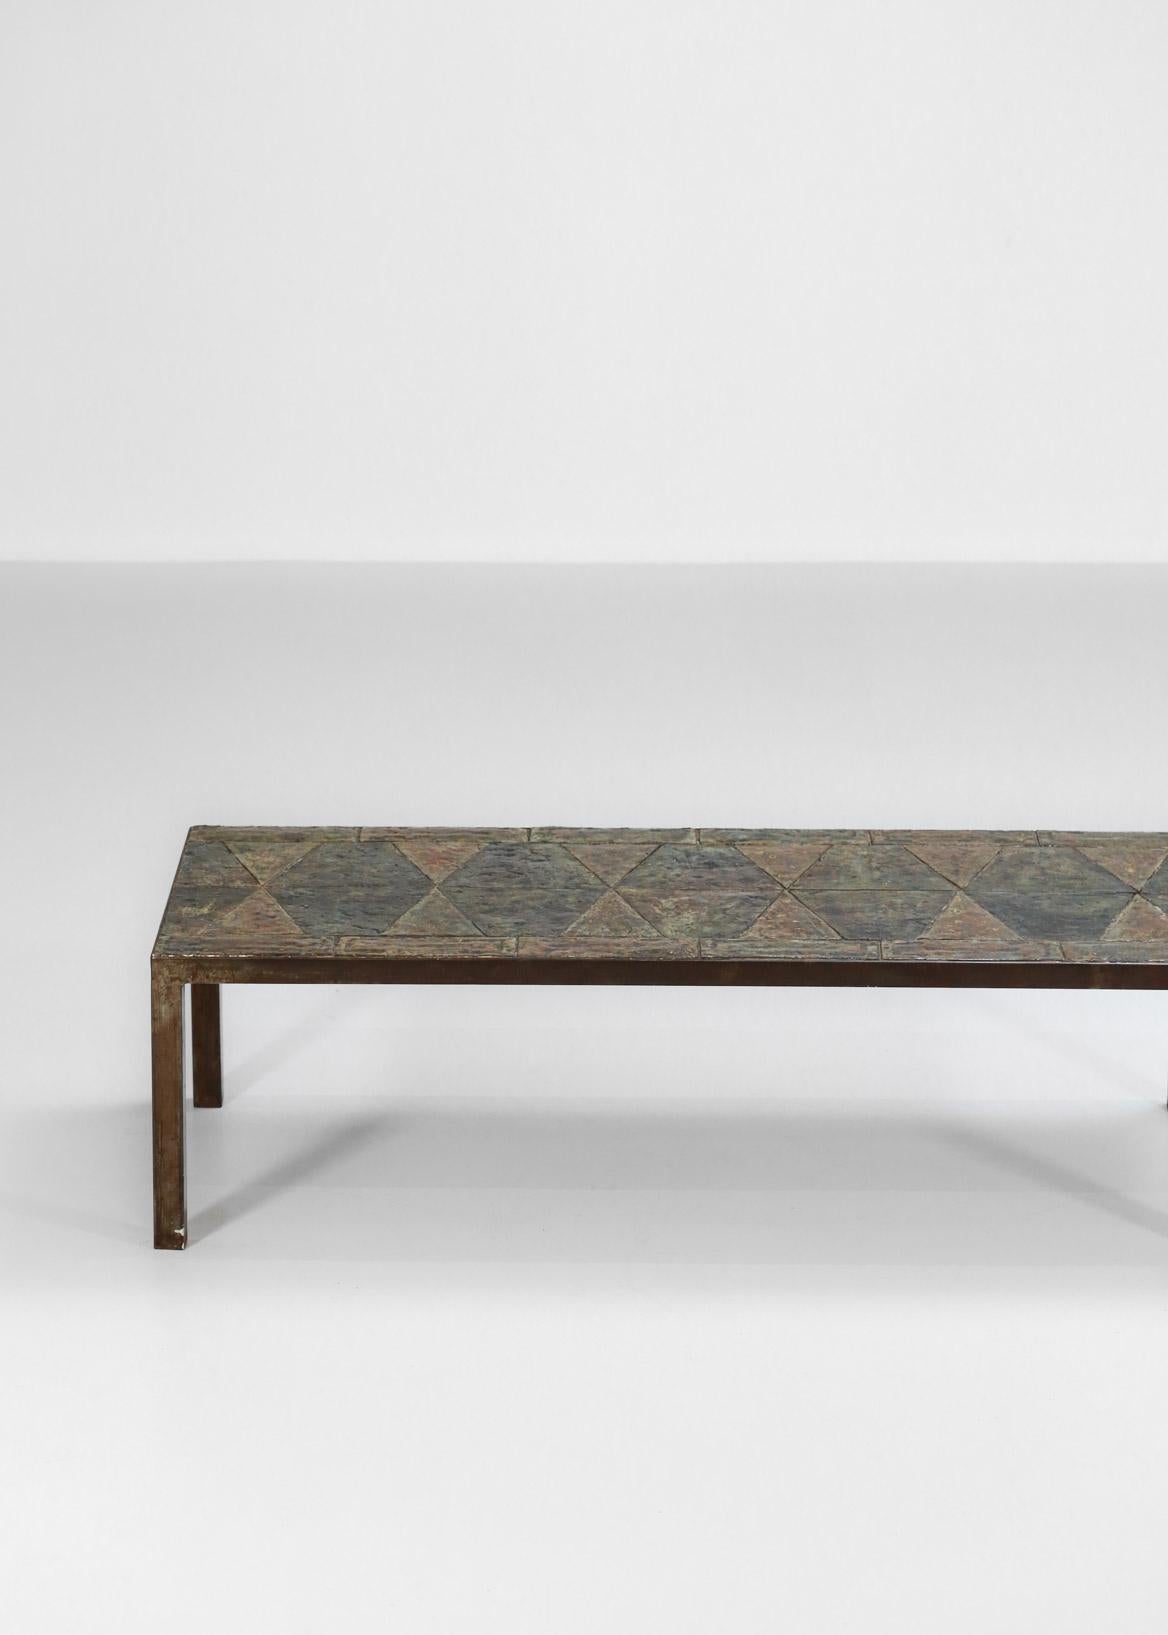 Brutalist Coffee Table from the 1960s Made of Enameled Lava Stones French Design 3